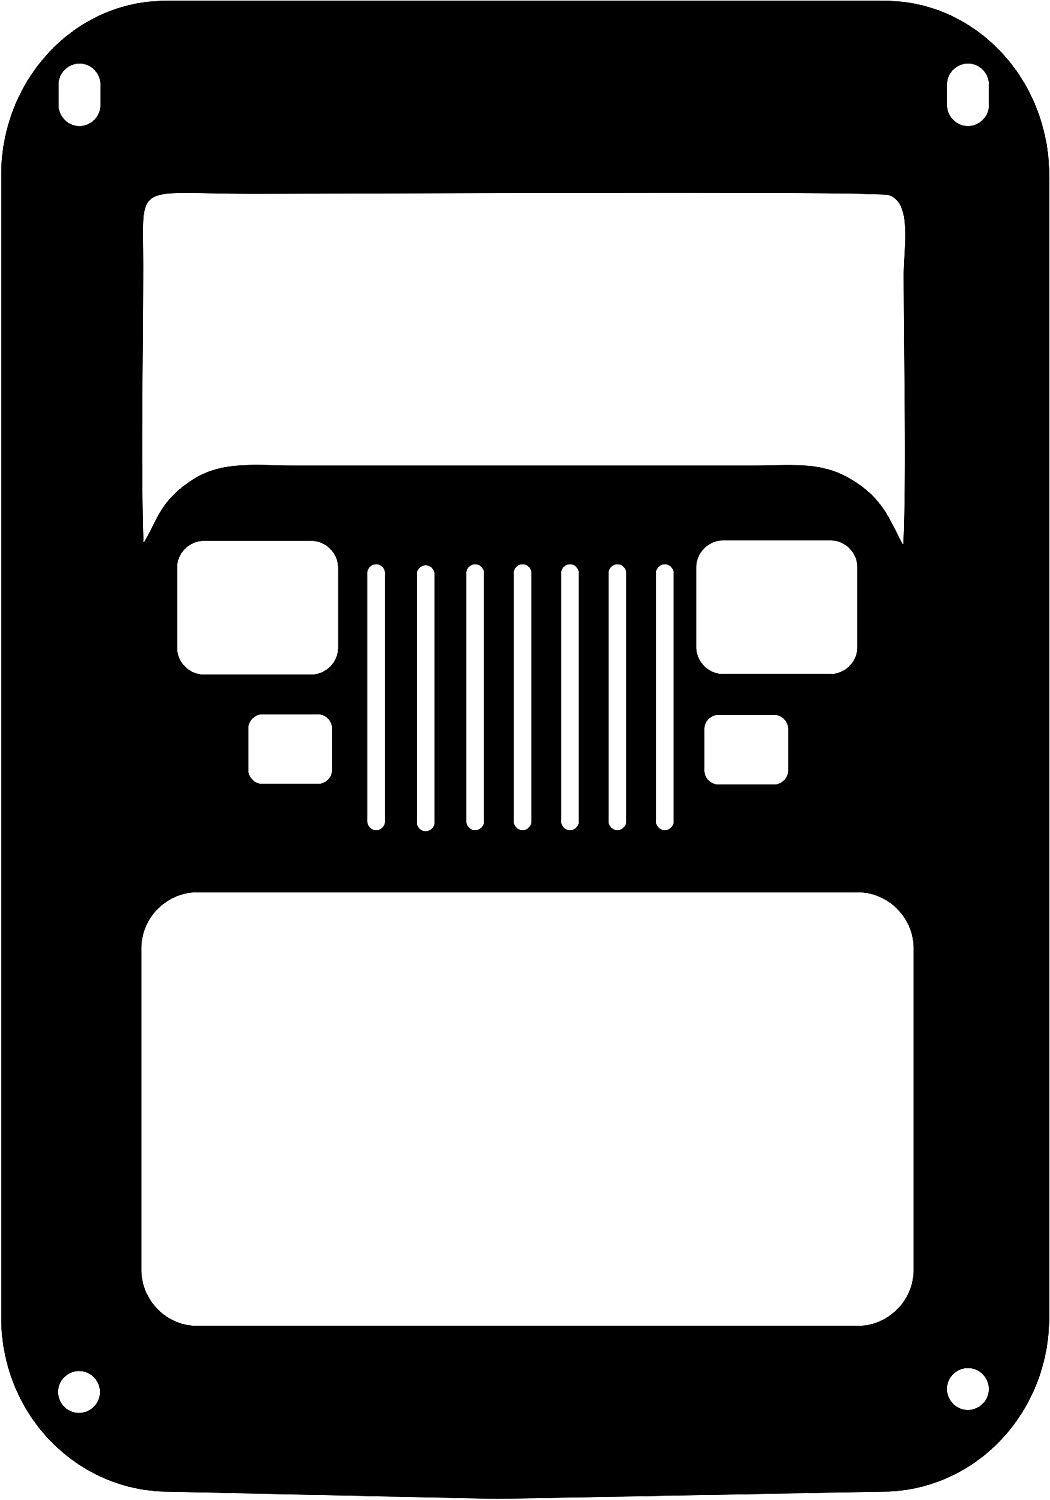 YJ Jeep Grill Logo - Amazon.com: JeepTails Jeep Grill with Square YJ Lights - Jeep JK ...